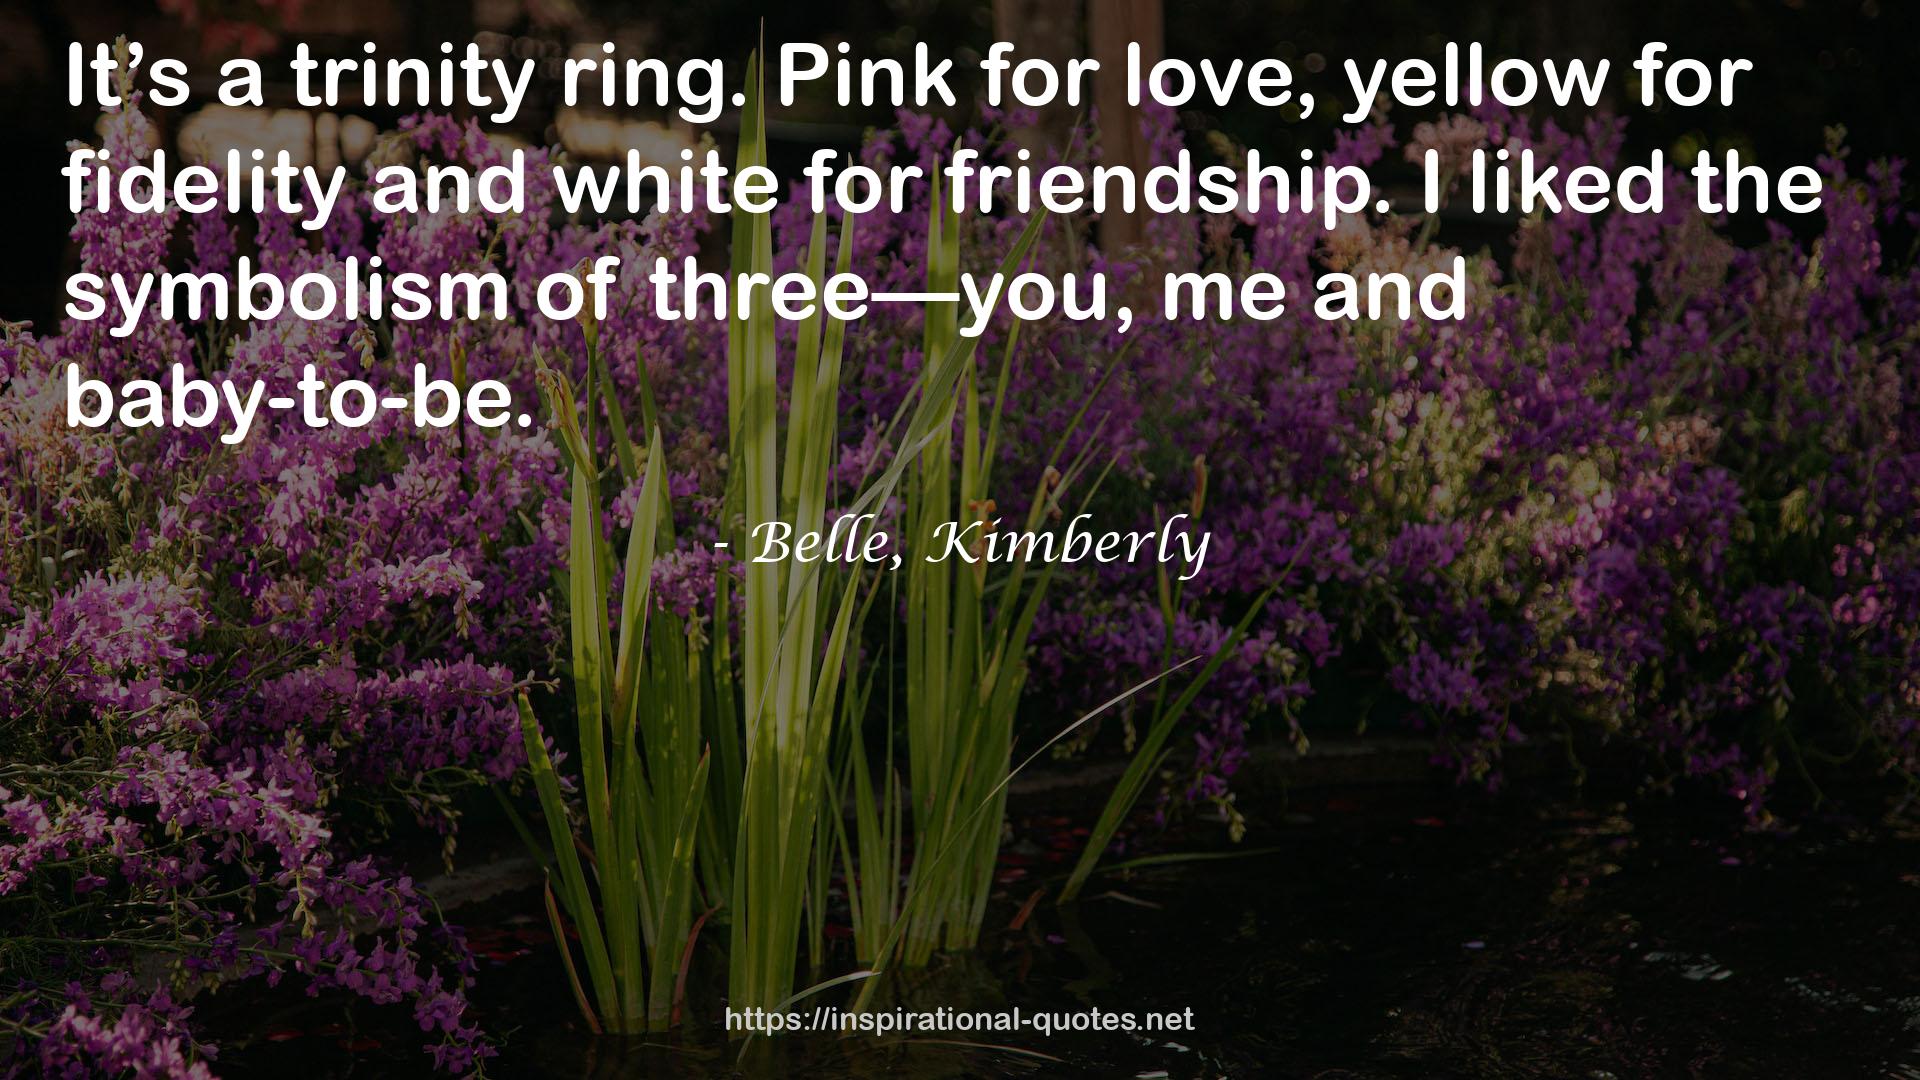 Belle, Kimberly QUOTES